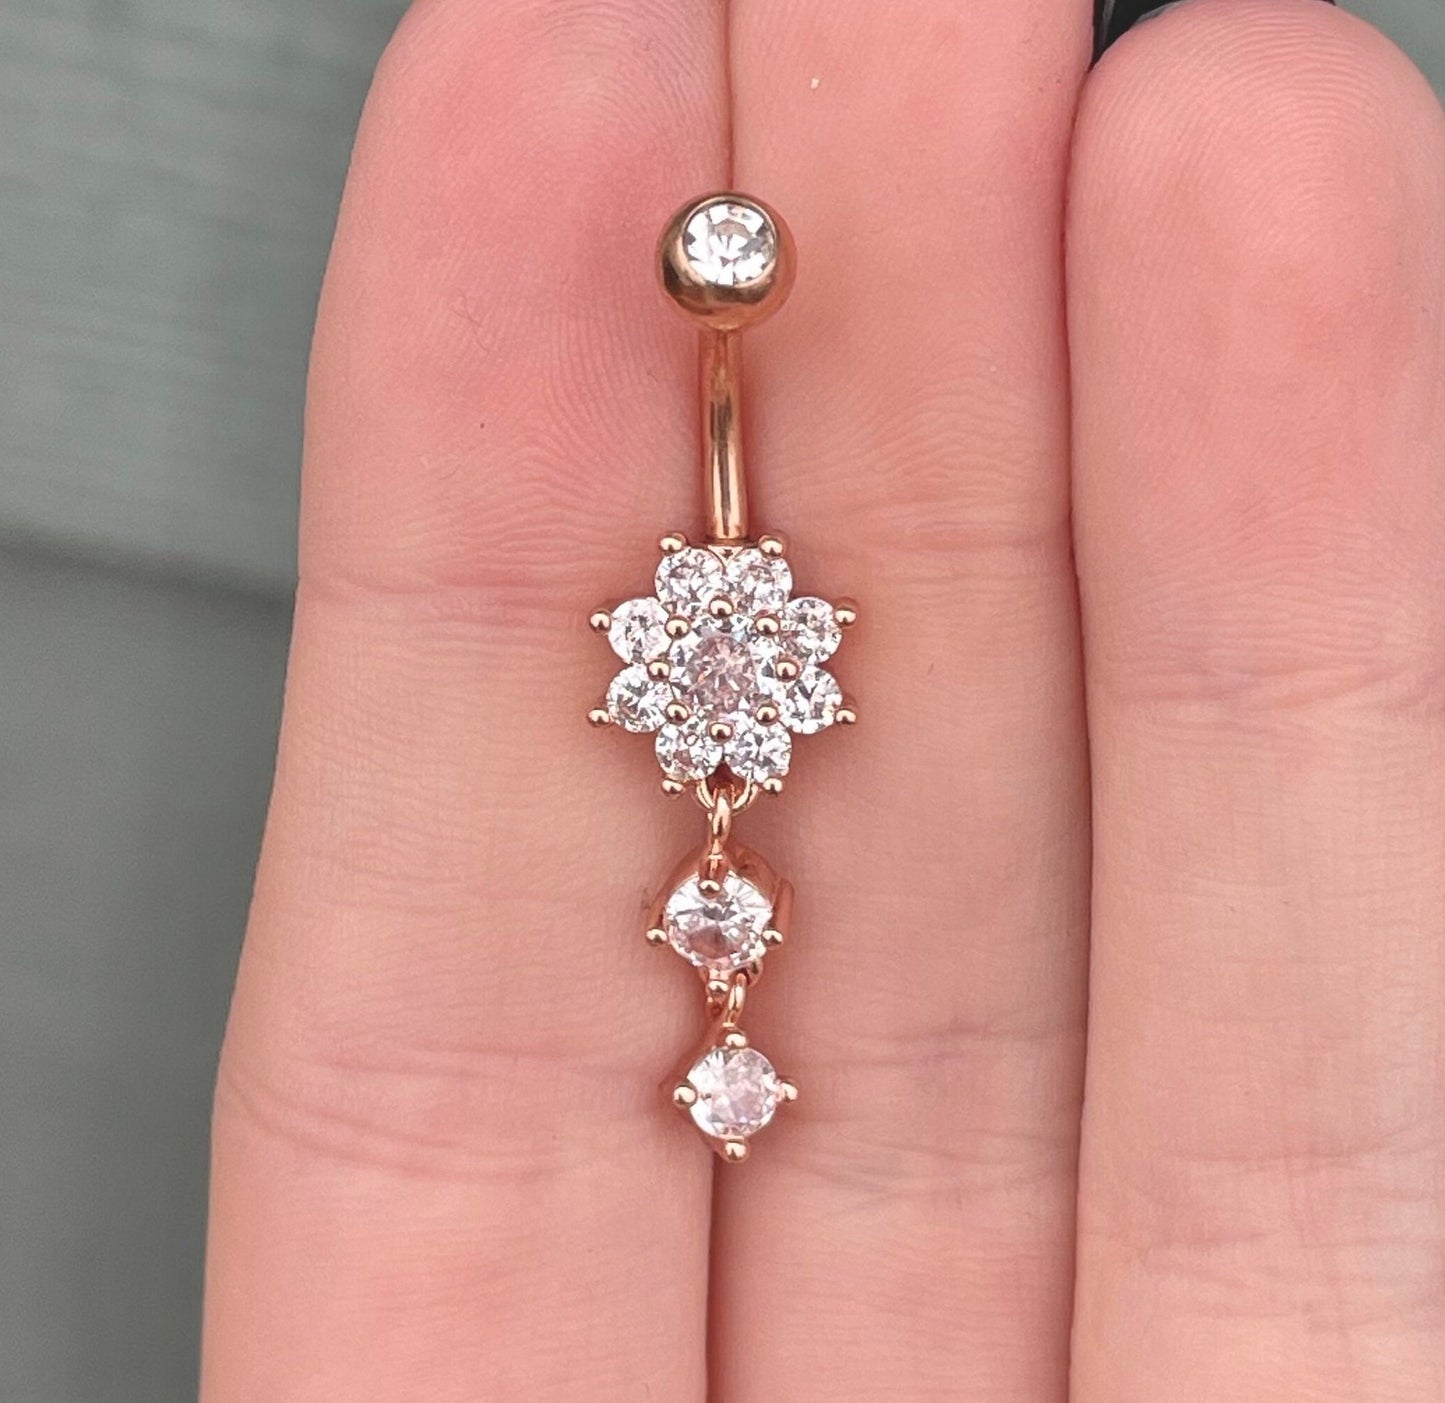 Small Dangly Silver Flower Belly Button Ring (14G | 10mm | Surgical Steel | Gold, Rose Gold, or Silver)